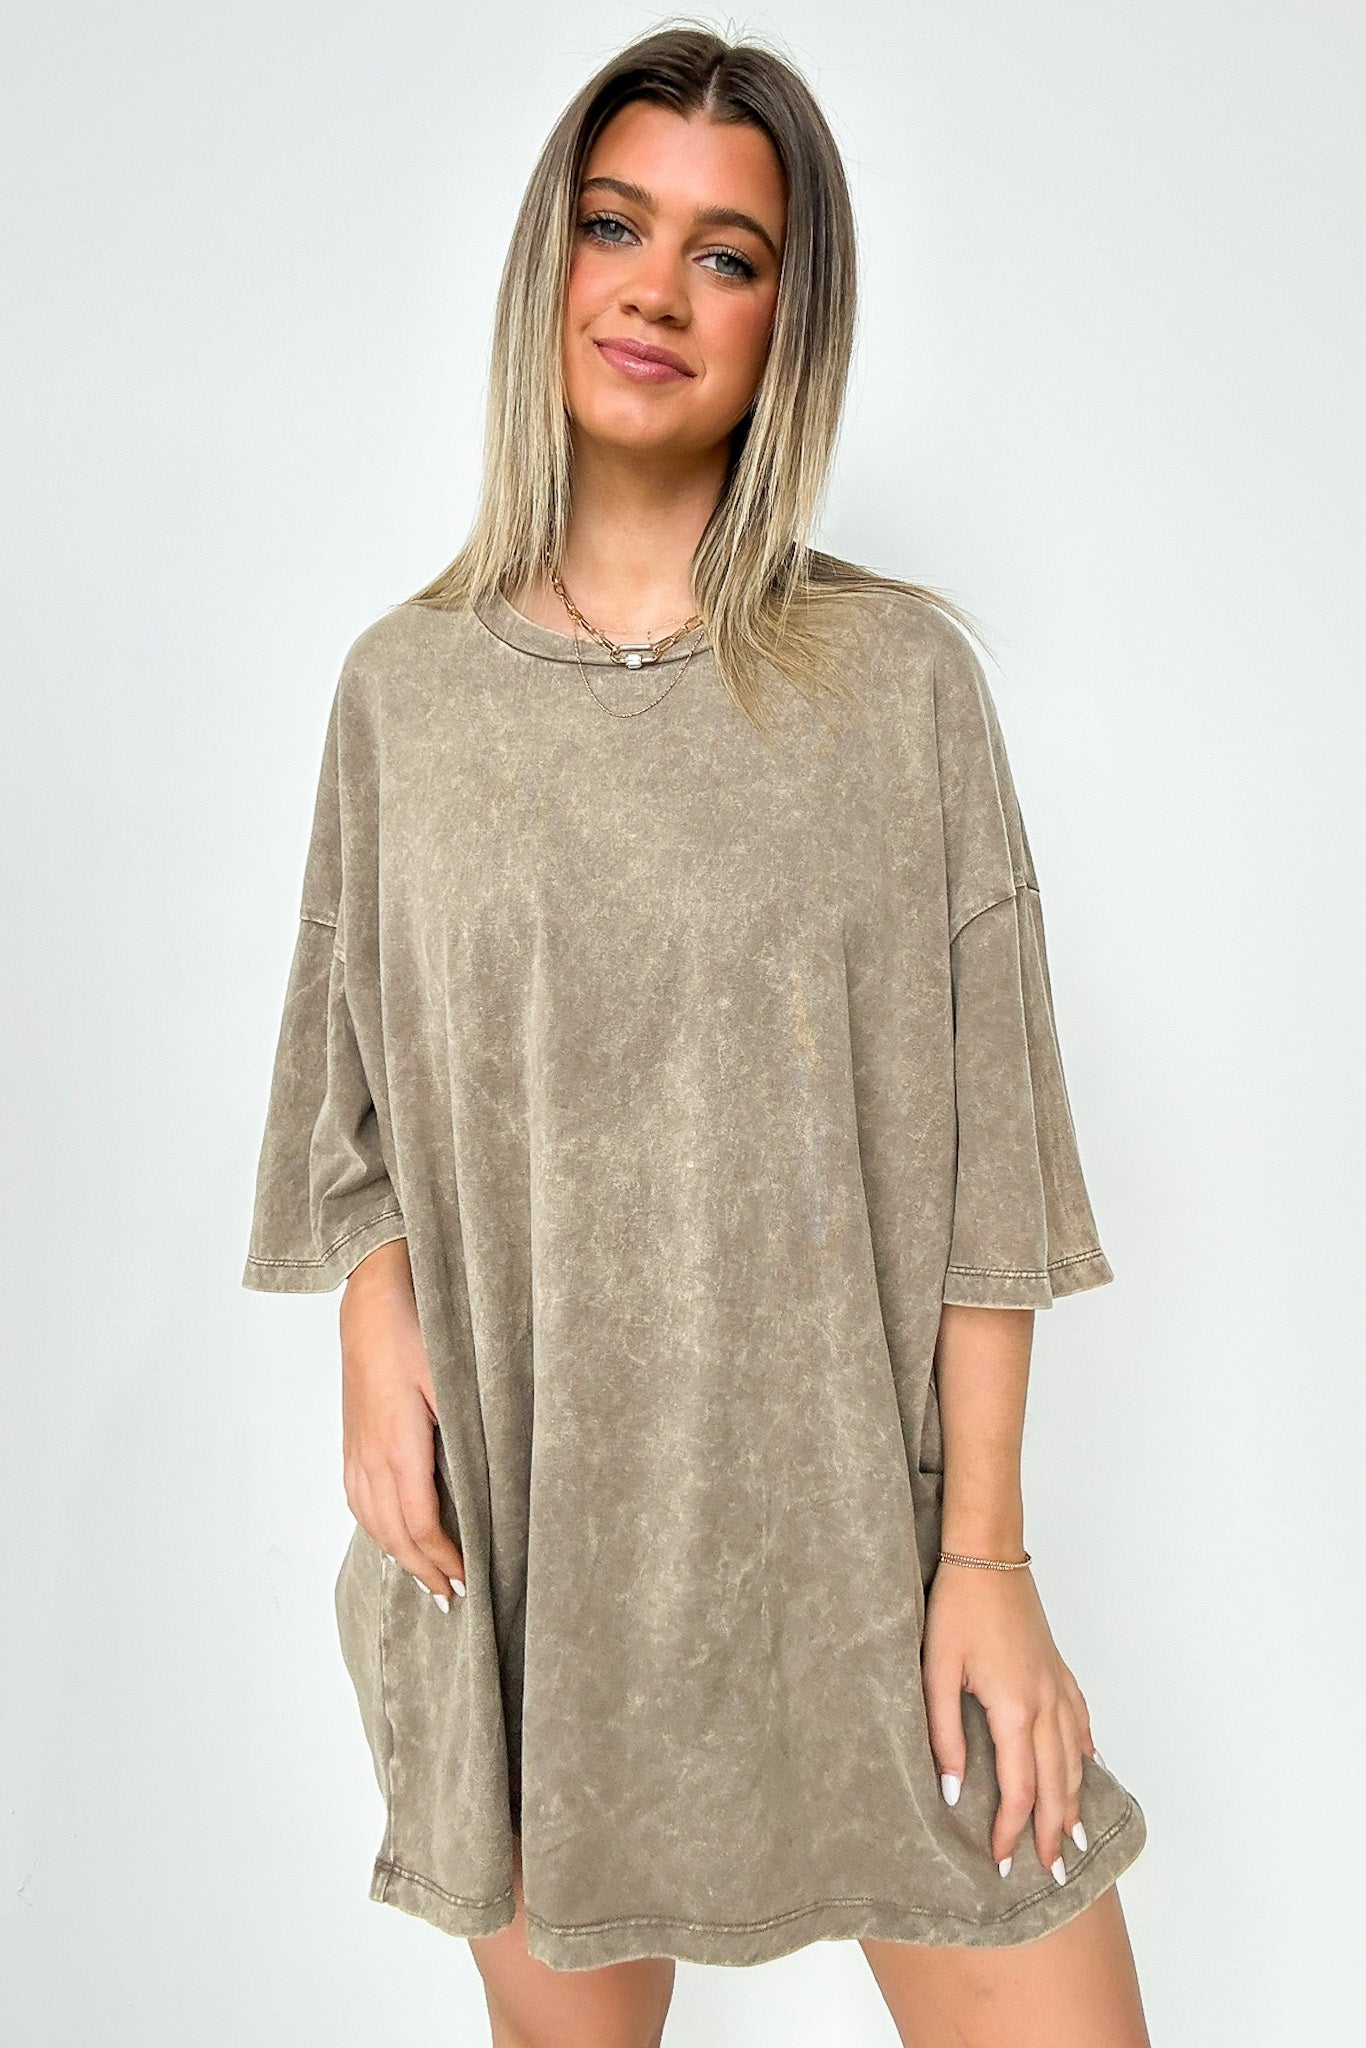 Mocha / SM Weekend Awaits Mineral Wash Oversized Top - BACK IN STOCK - Madison and Mallory